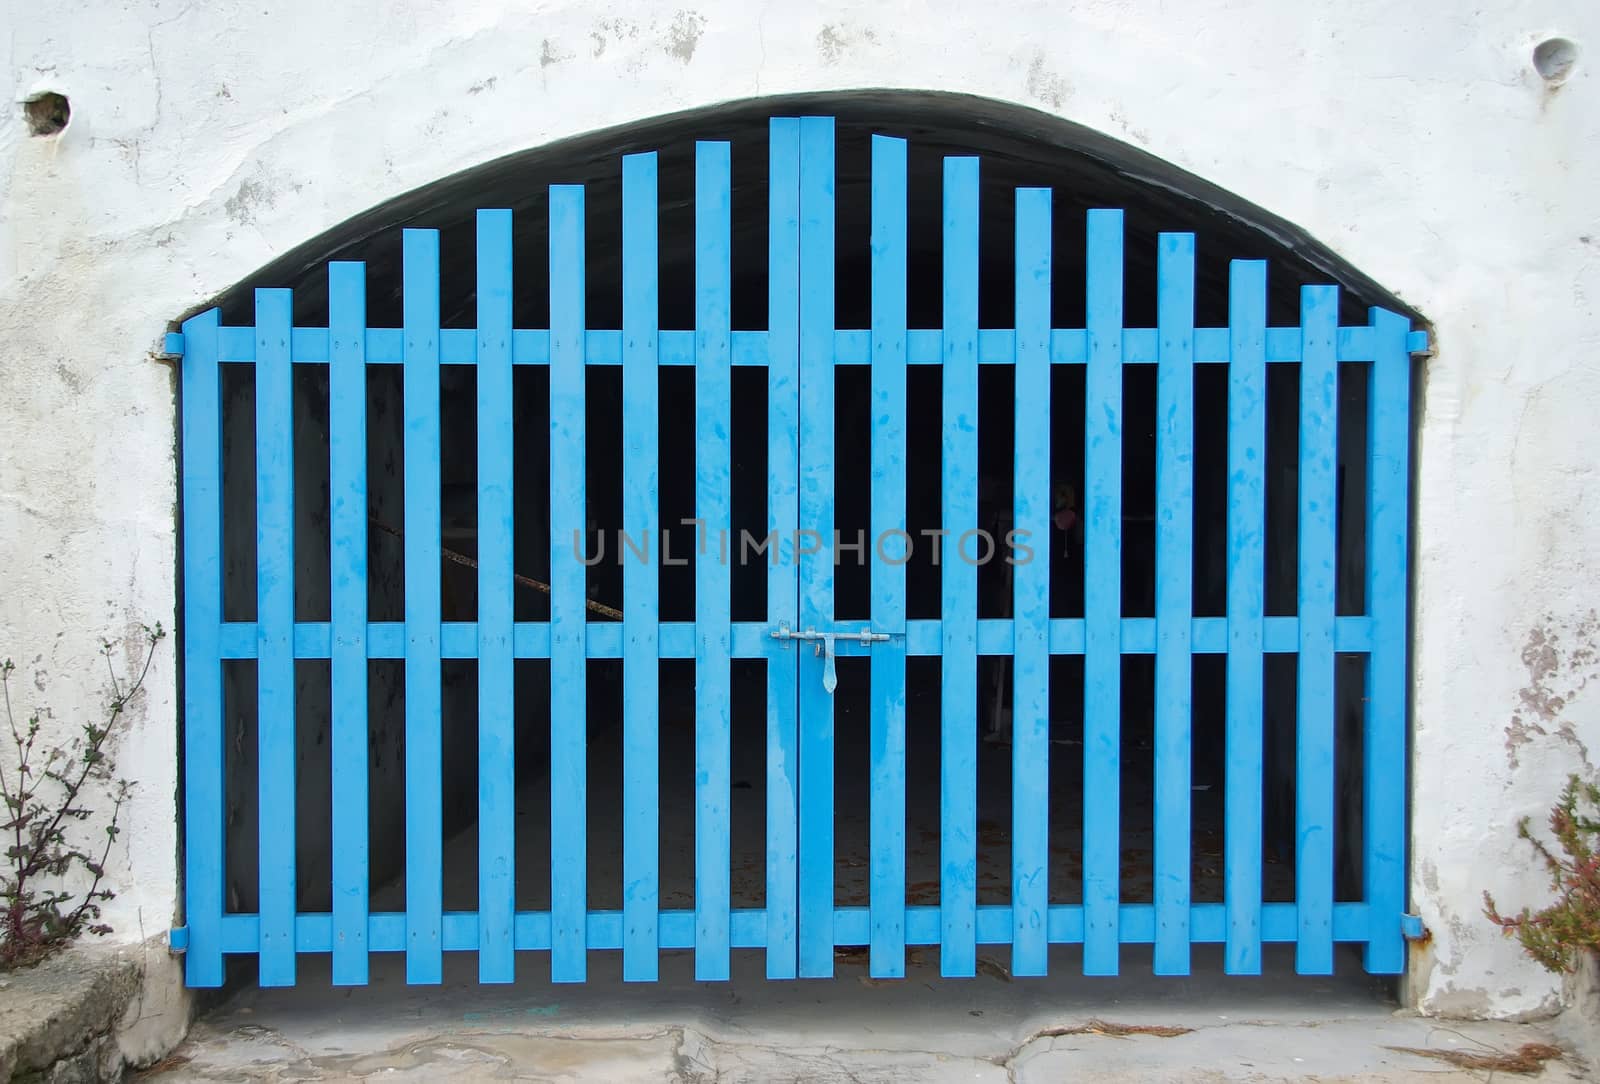 Old Cyan Wooden Door of a boat shelter in the Mediterranean Sea (Majorca)